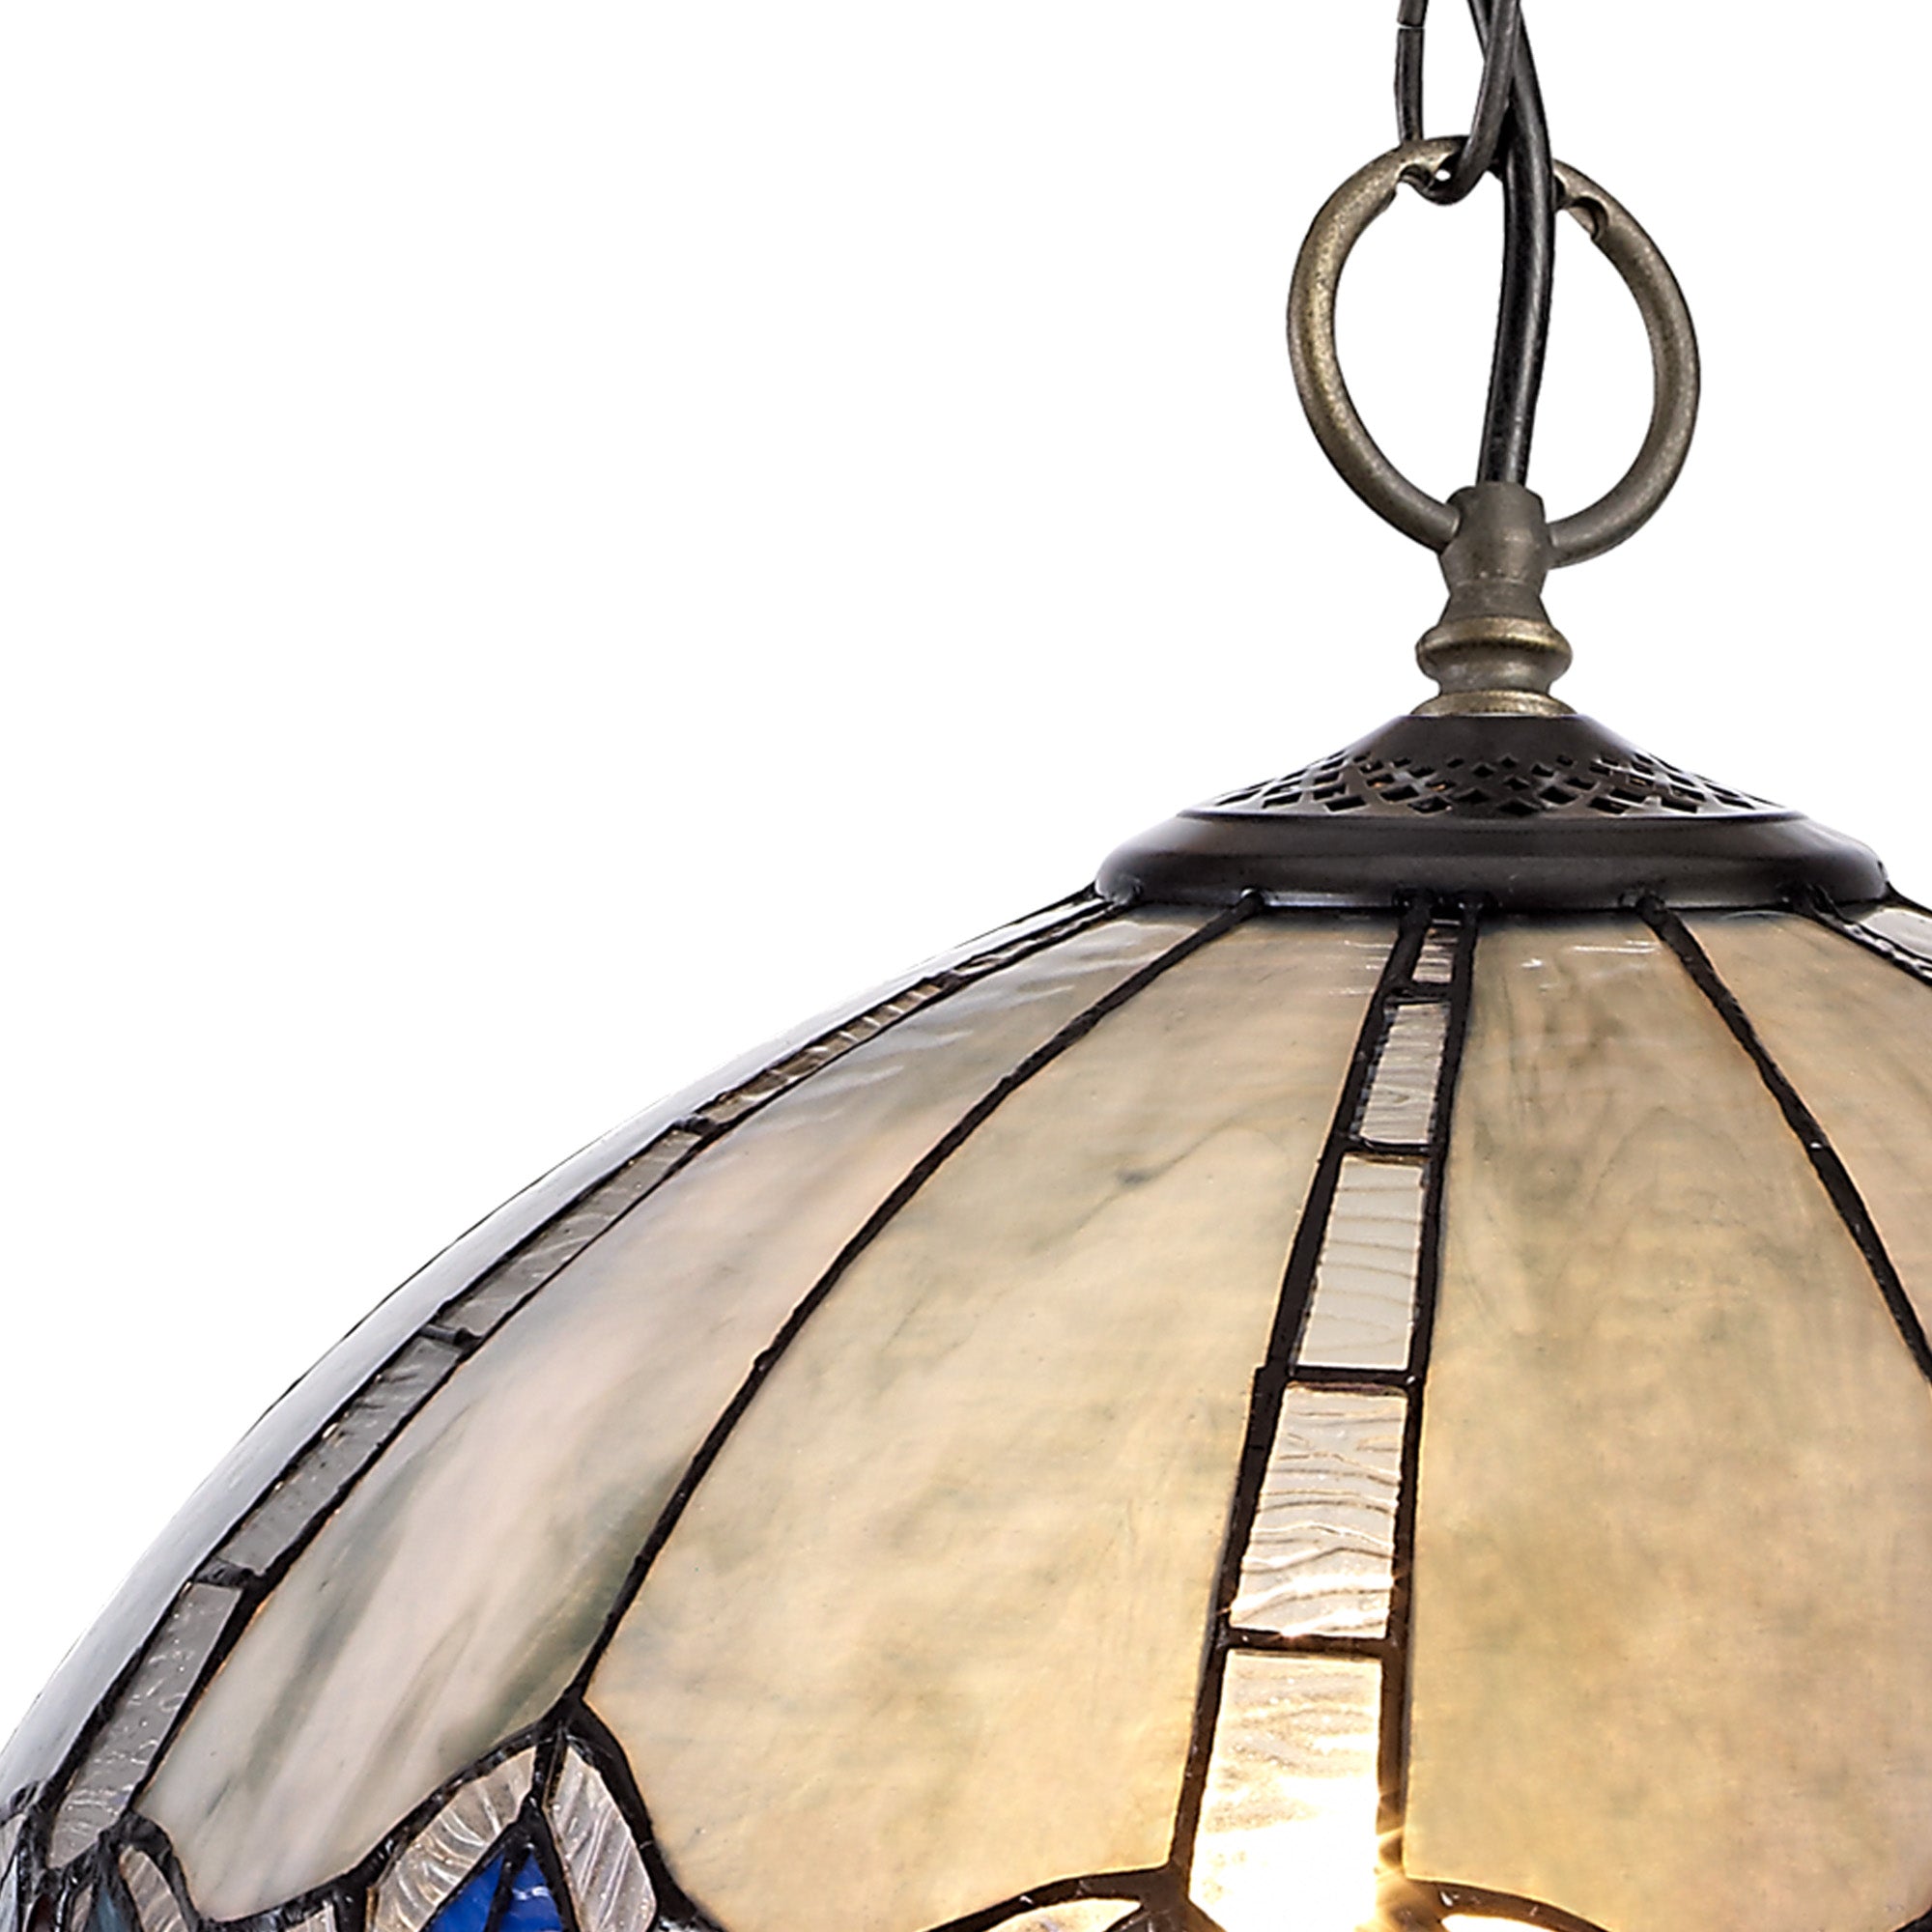 Oksana 2/3 Light Centre Ceiling Downlight E27 With Medium/Large Tiffany Shade, Blue & Clear Crystal & Aged Antique Brass